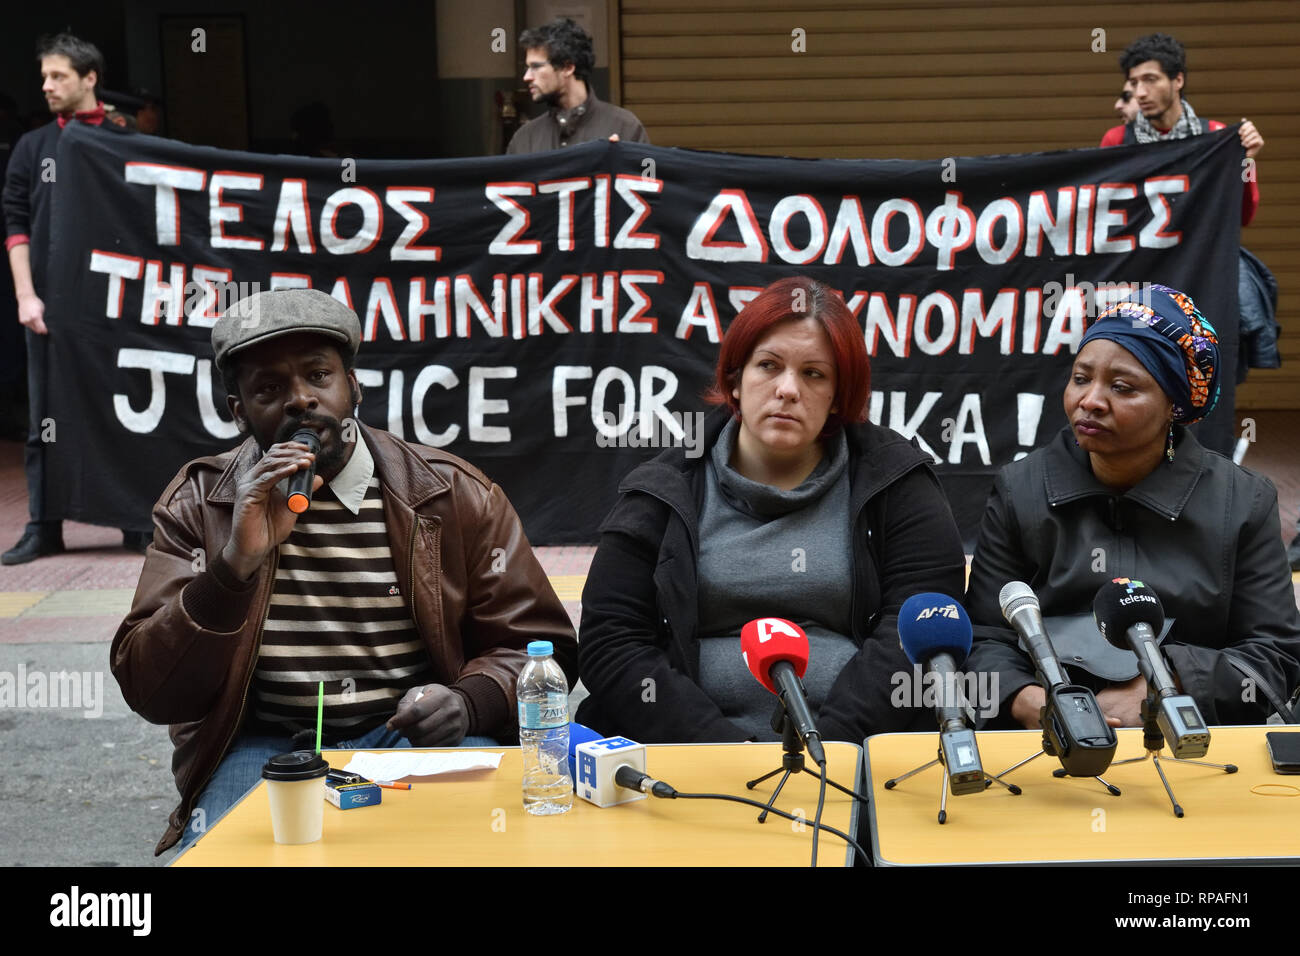 Athens, Greece. 21st Feb 2019. Protesters in front of the Omonia police station demand justice for Nigerian migrant Ebuka who died there under police custody  in Athens, Greece. Credit: Nicolas Koutsokostas/Alamy Live News. Stock Photo